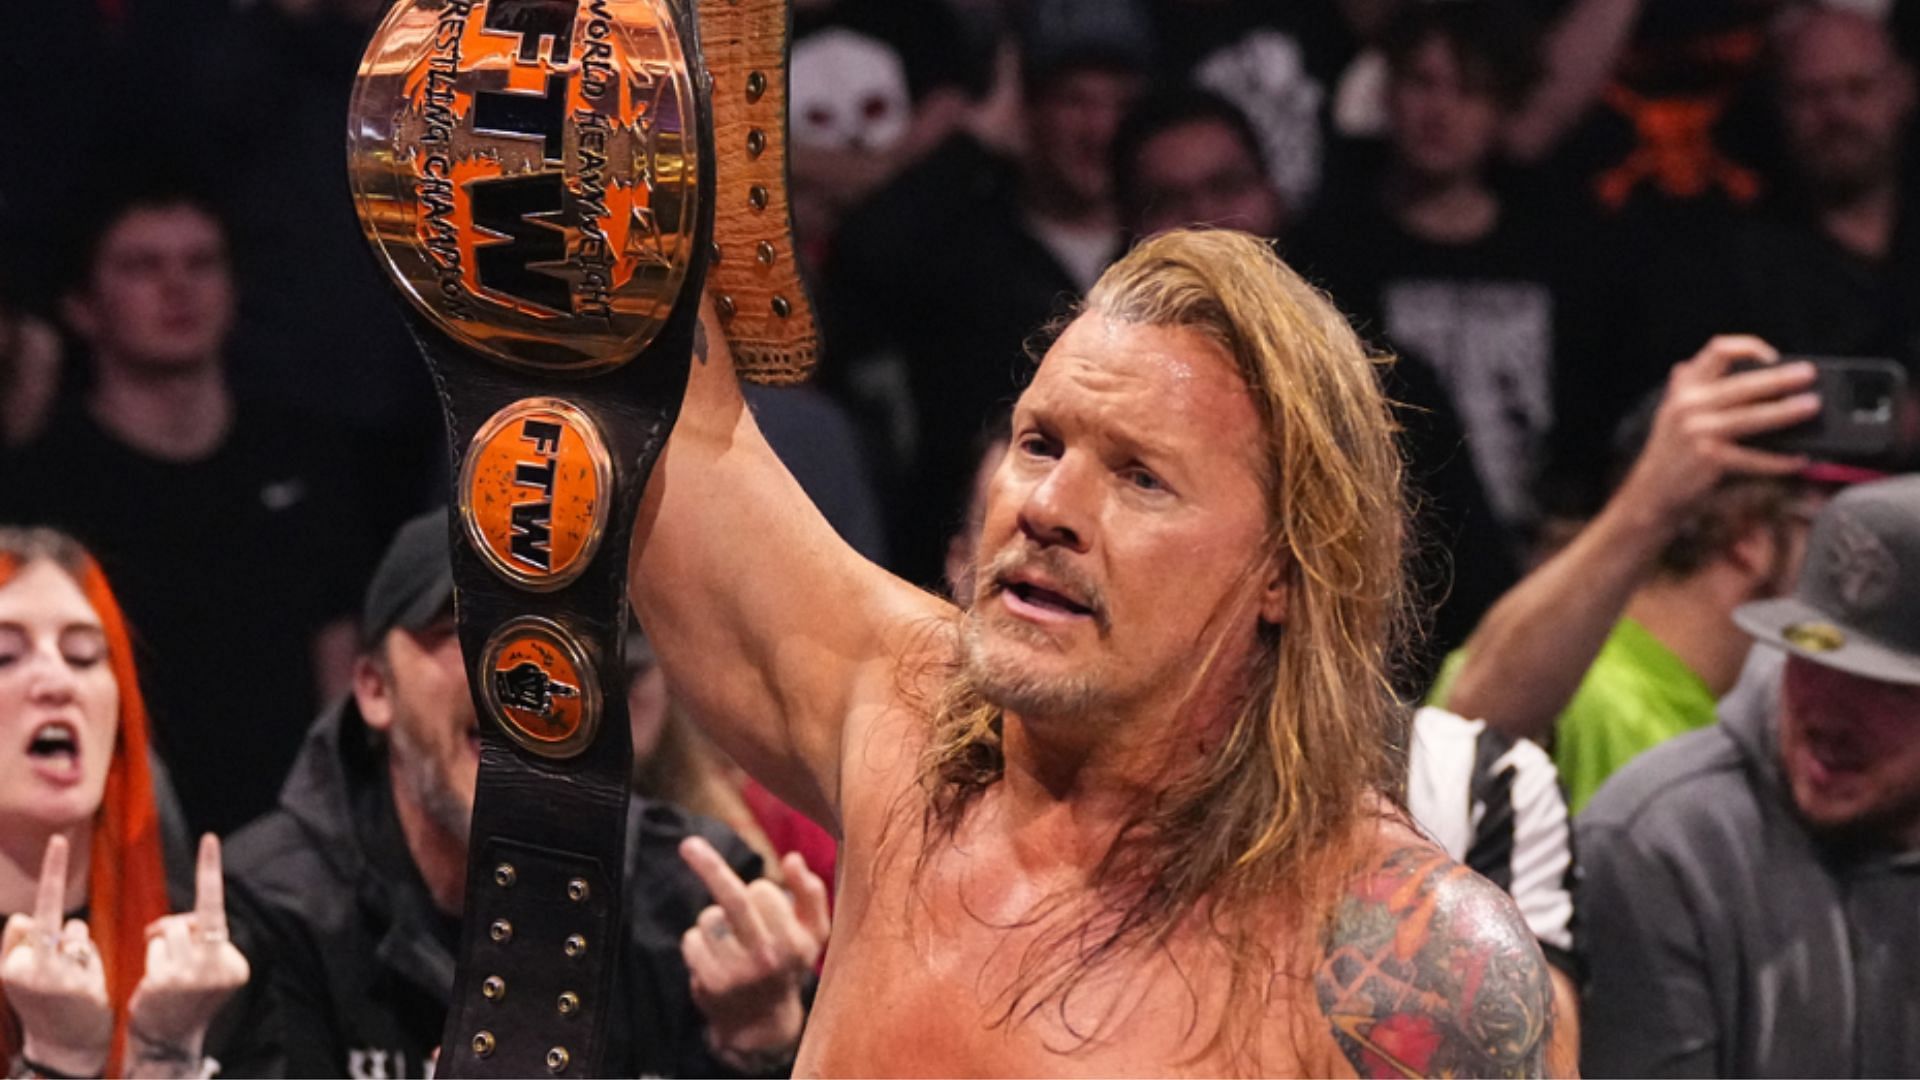 Chris Jericho is the reigning FW Champion in AEW [Image Credits: AEW